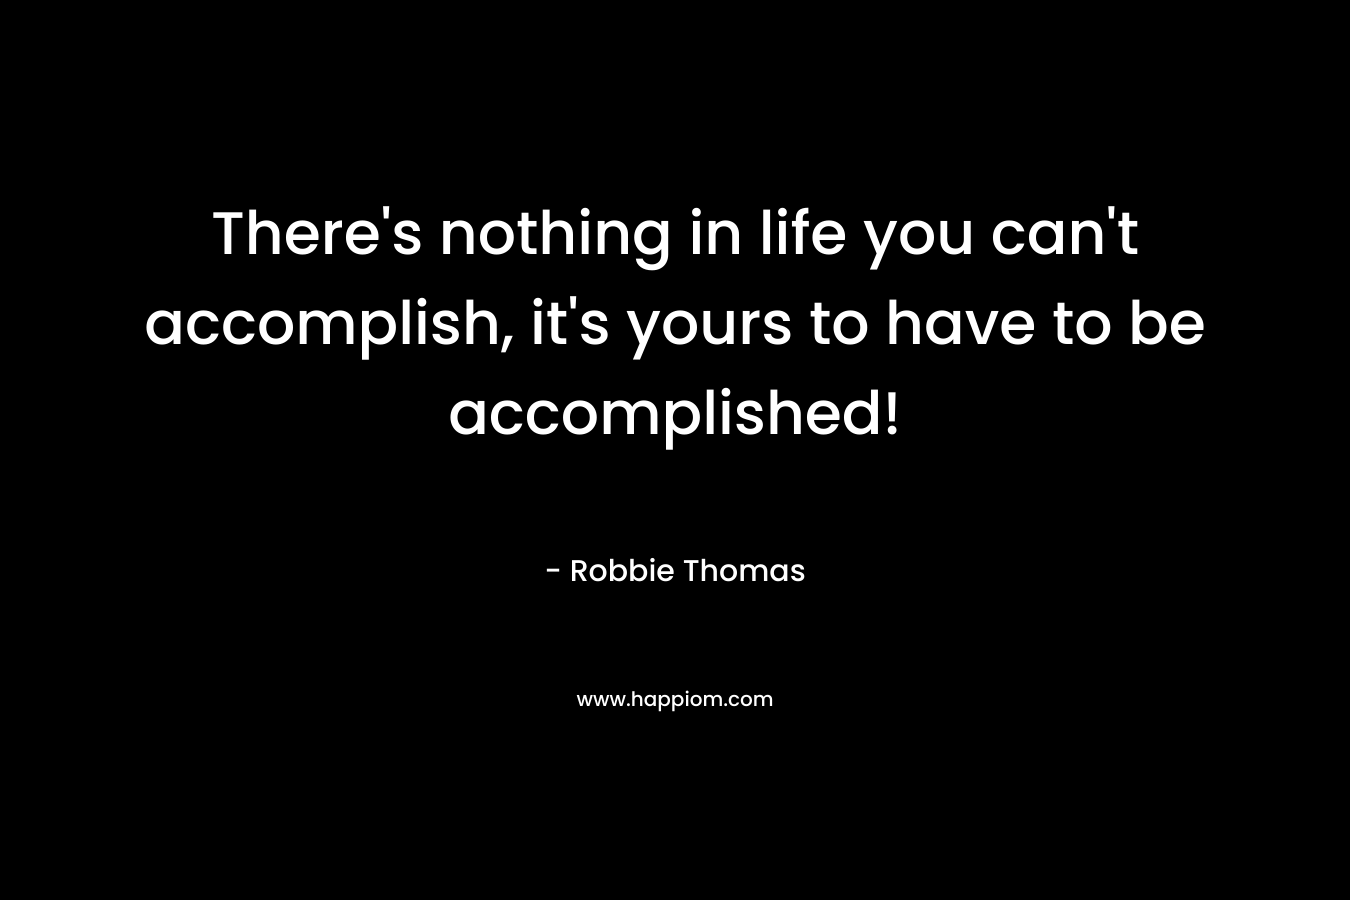 There’s nothing in life you can’t accomplish, it’s yours to have to be accomplished! – Robbie Thomas